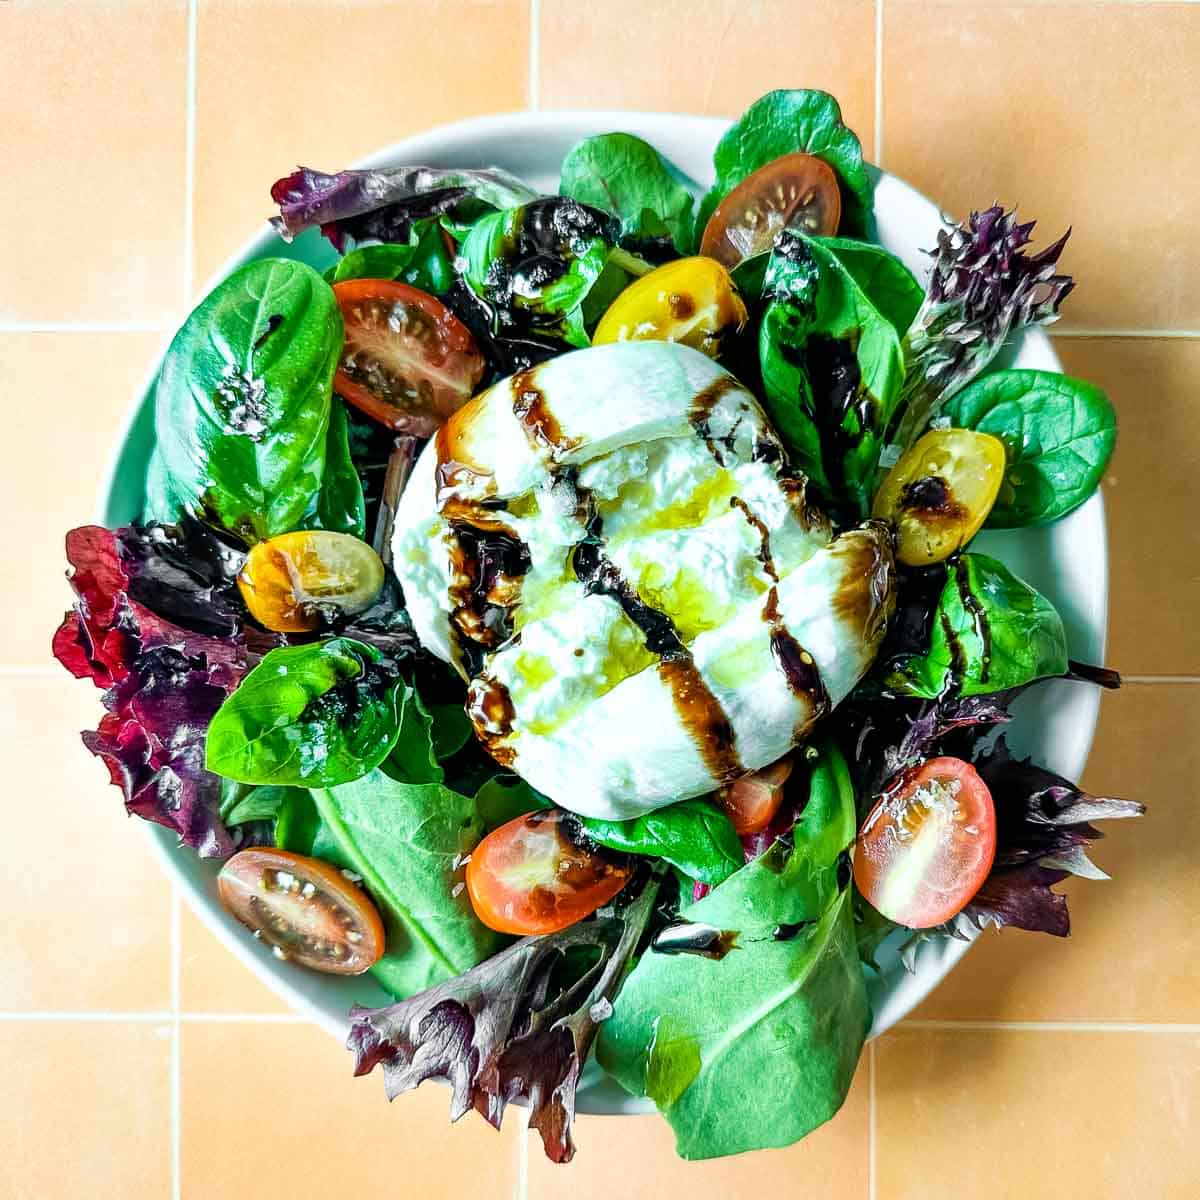 burrata salad with balsamic glaze including spring mix, basil leaves, and halved cherry tomatoes drizzled with balsamic glaze and olive oil.